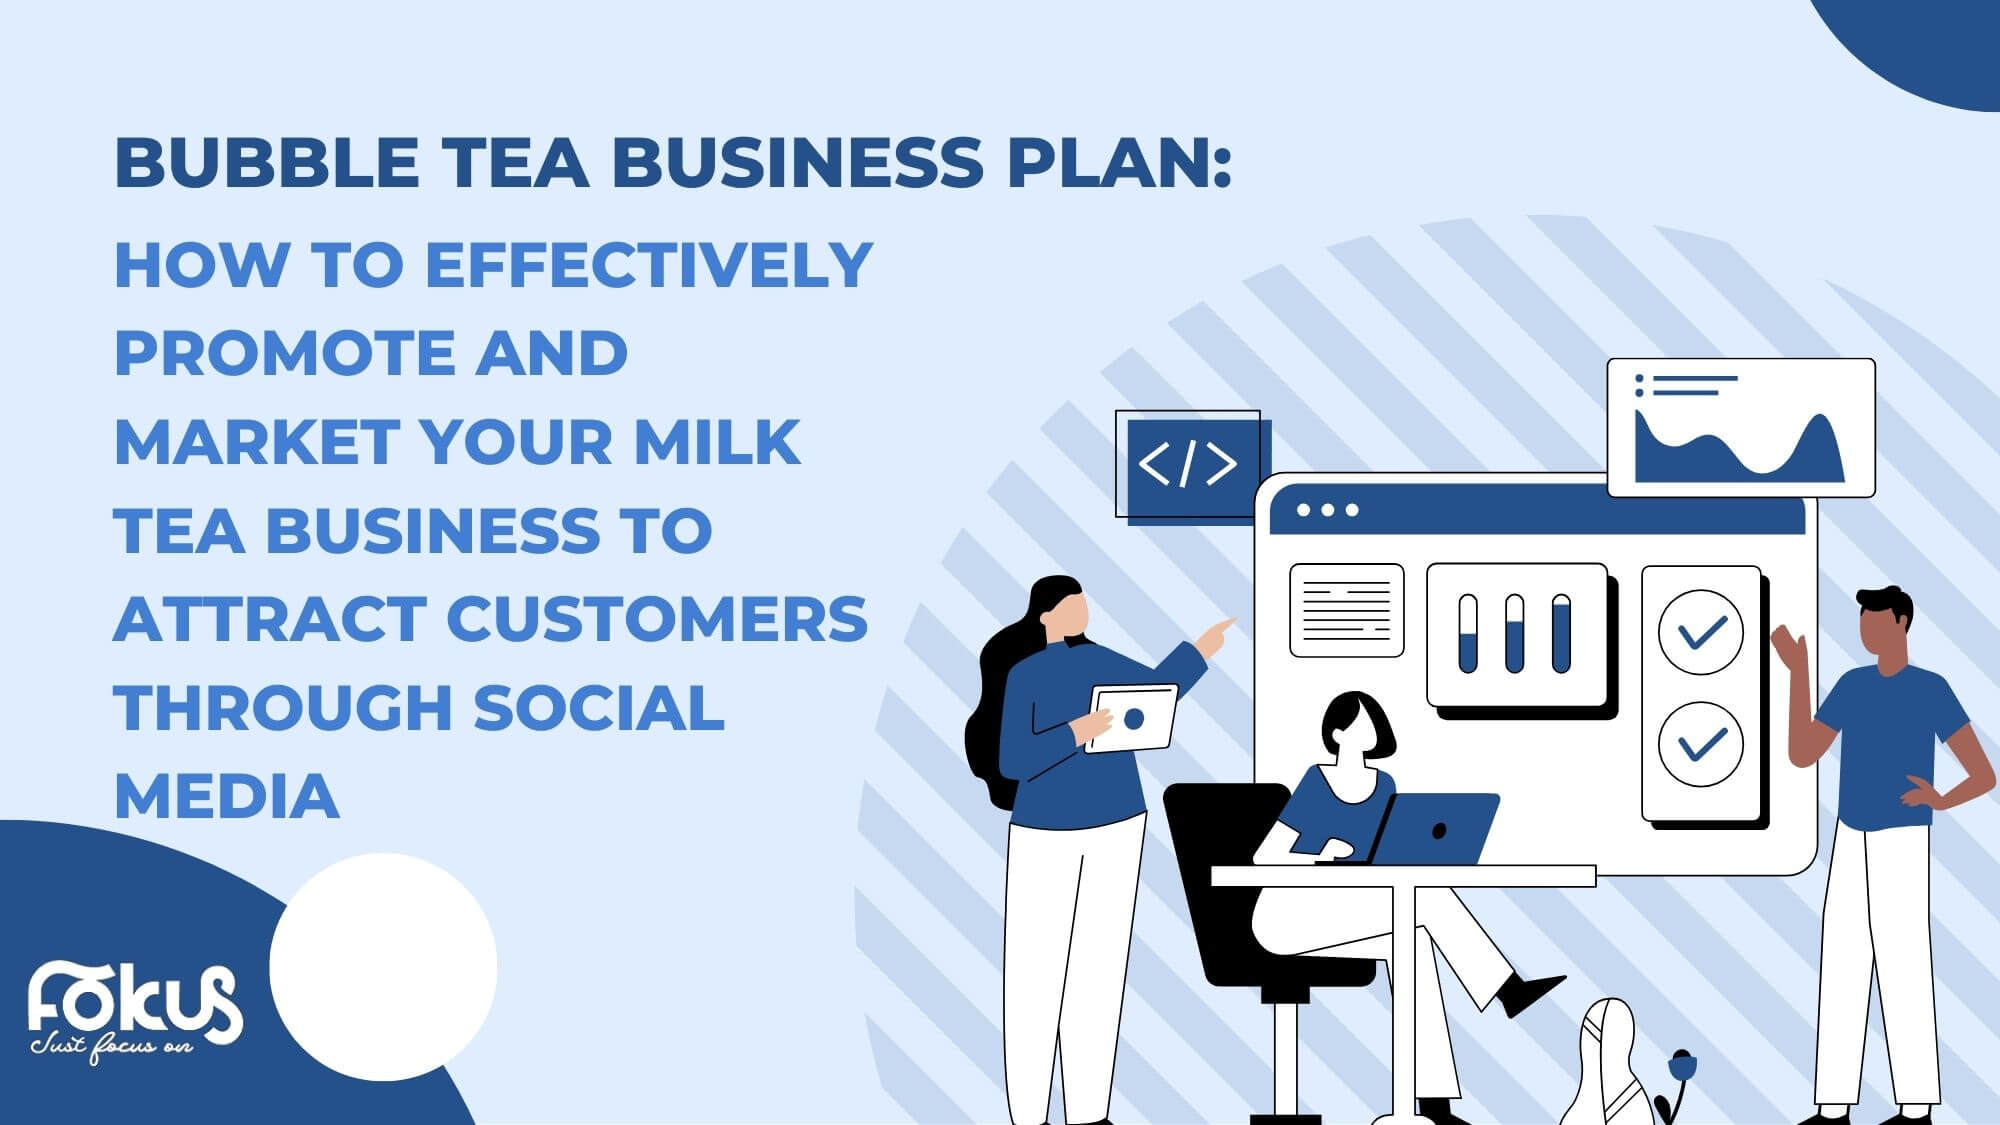 Bubble Tea Business Plan: How to effectively promote and market your milk tea business to attract customers through social media